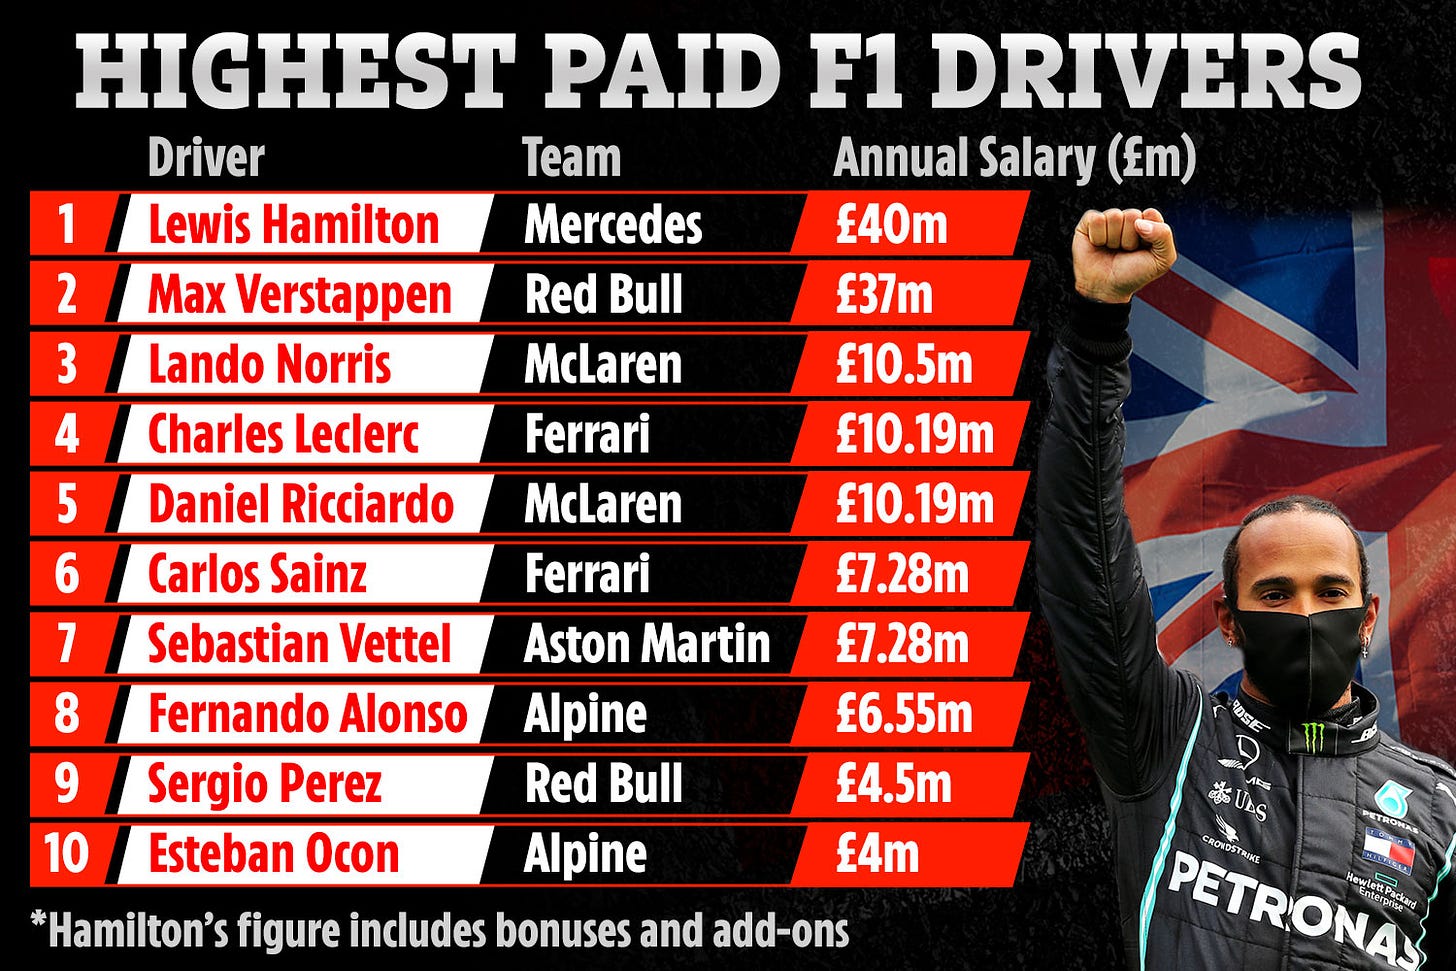 F1's highest-paid drivers for the 2022 season